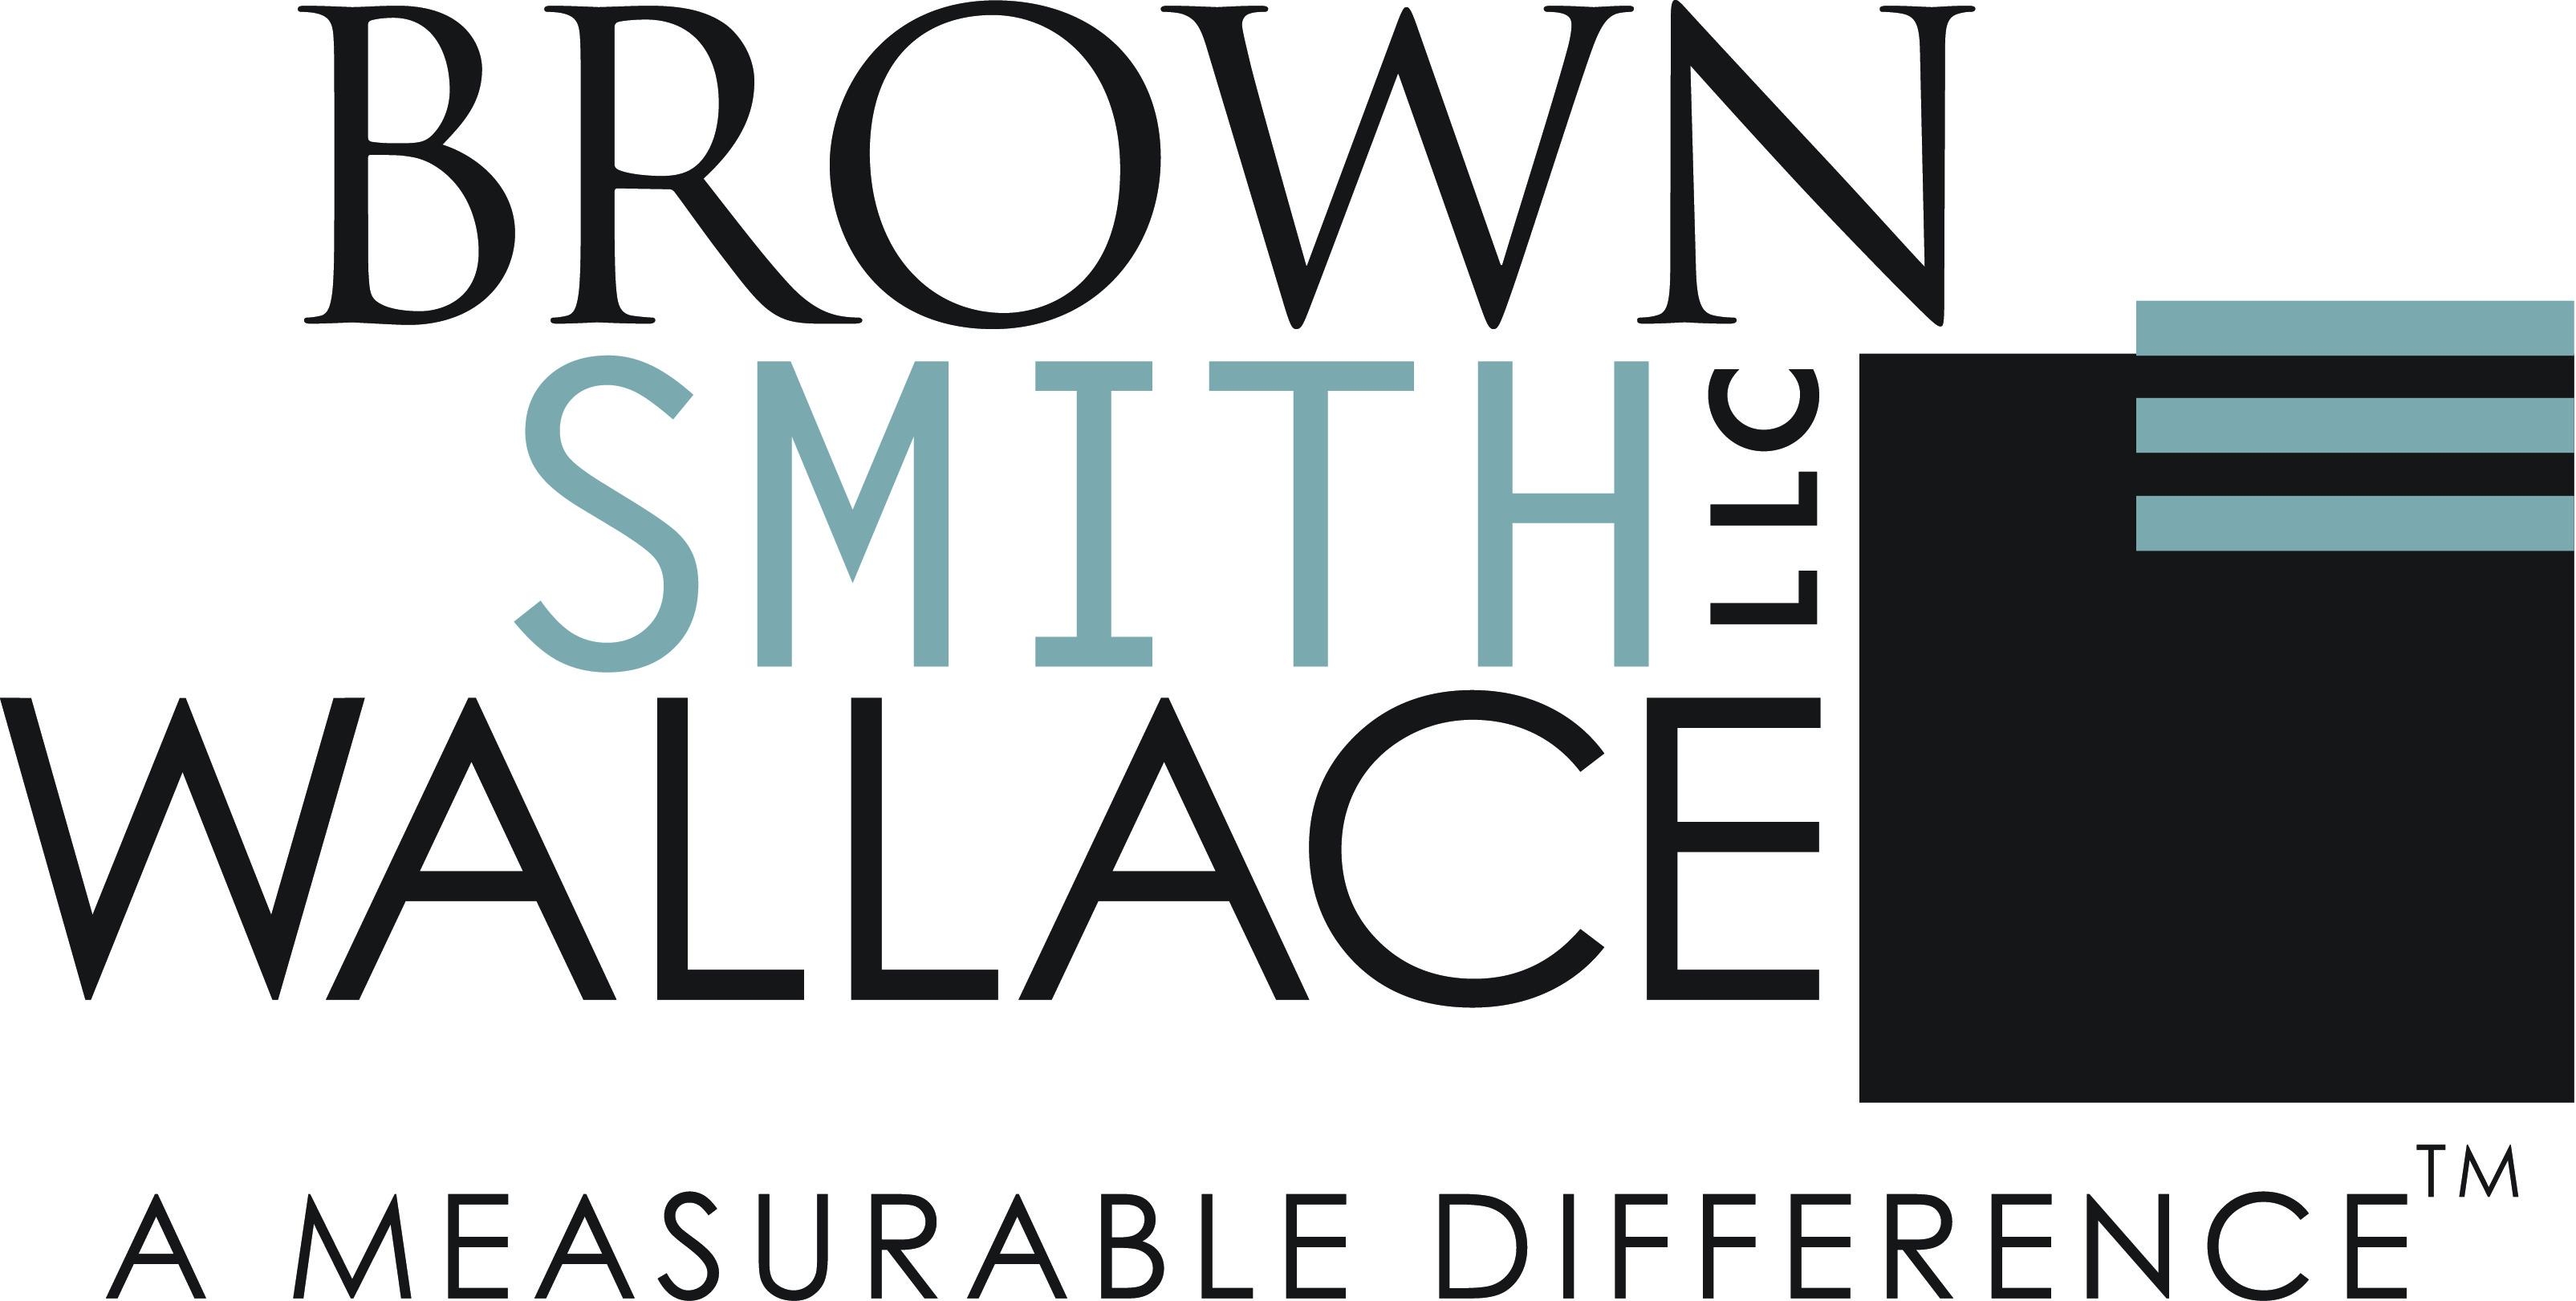 Brown Smith Wallace